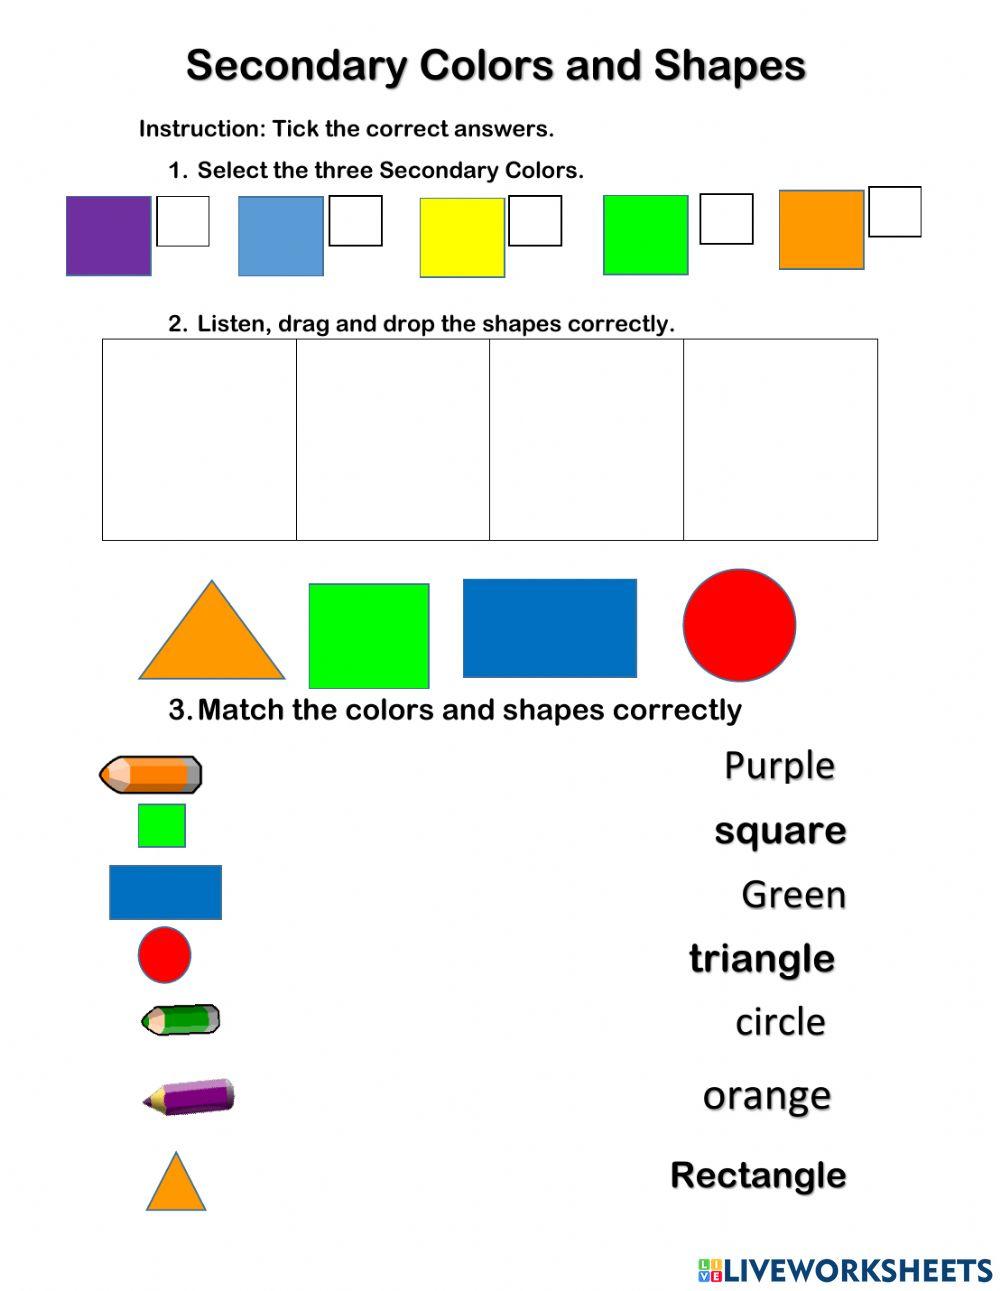 Secondary colors and shapes